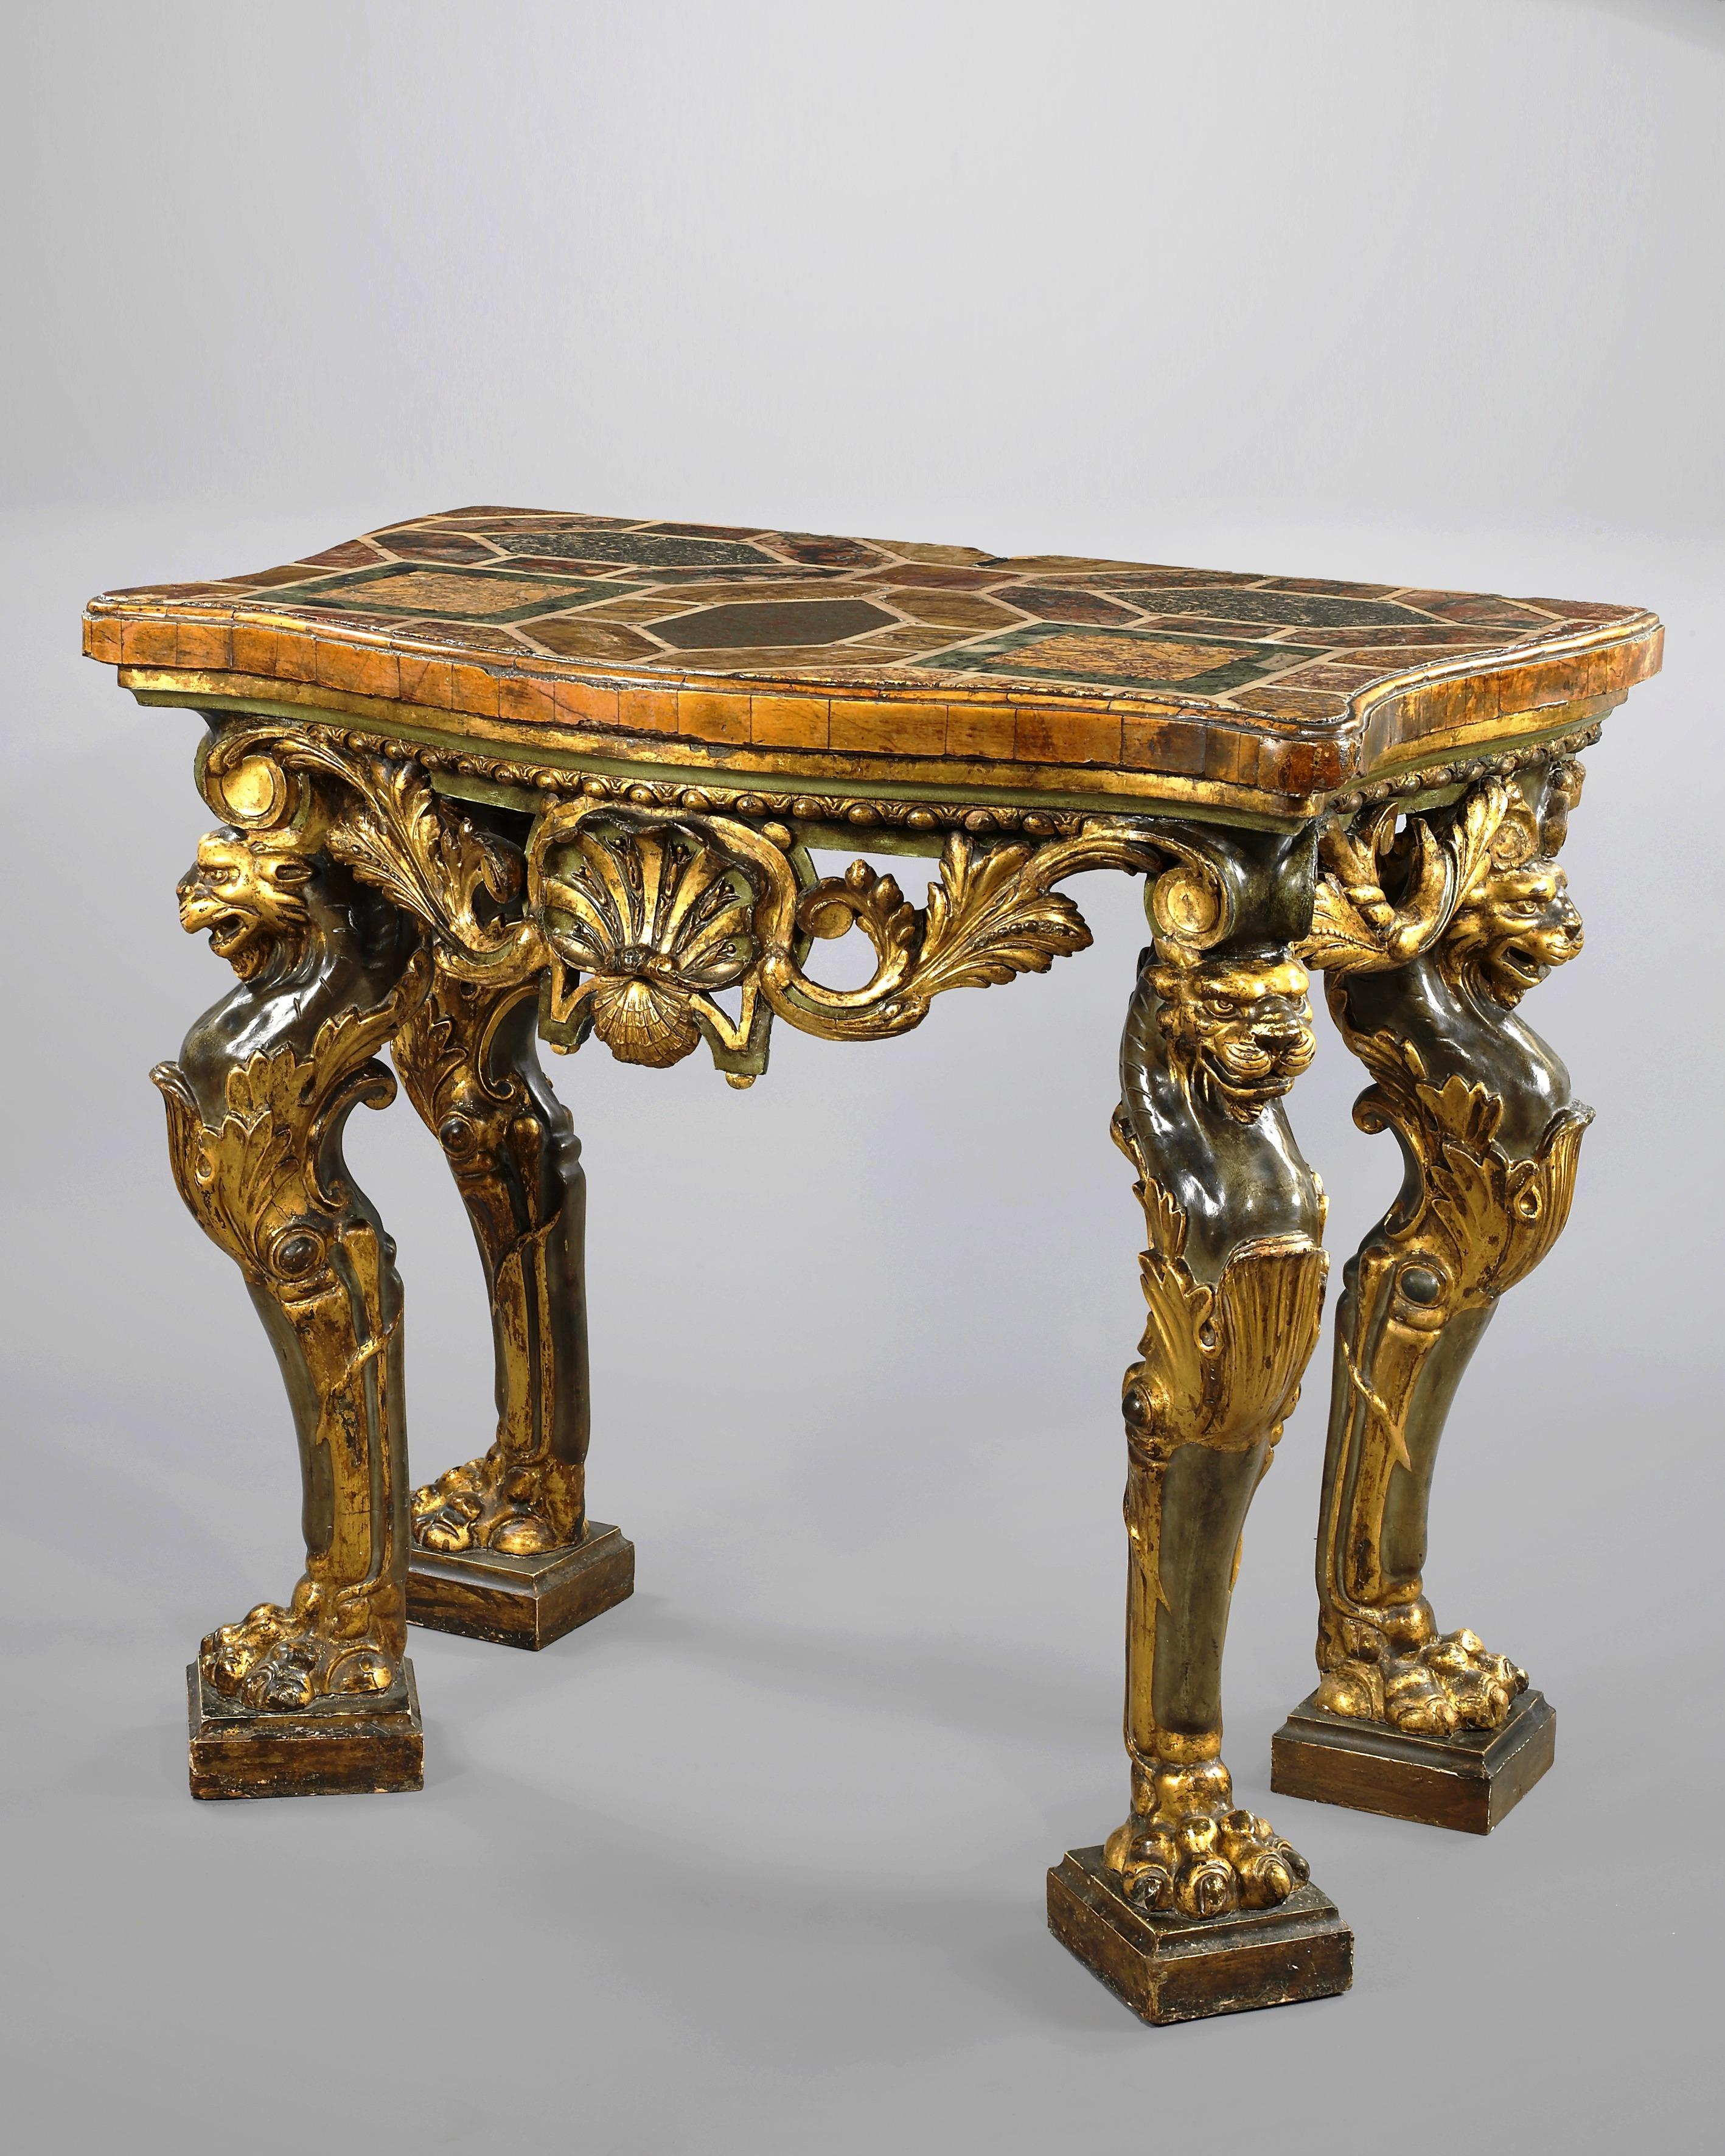 Exceptional carved giltwood Italian console table, with top made of inlays of various marbles, 19th century
The apron is decorated with foliated scrolls and seashells, lying on four legs representing sheathed lions.
The undulated marble top is